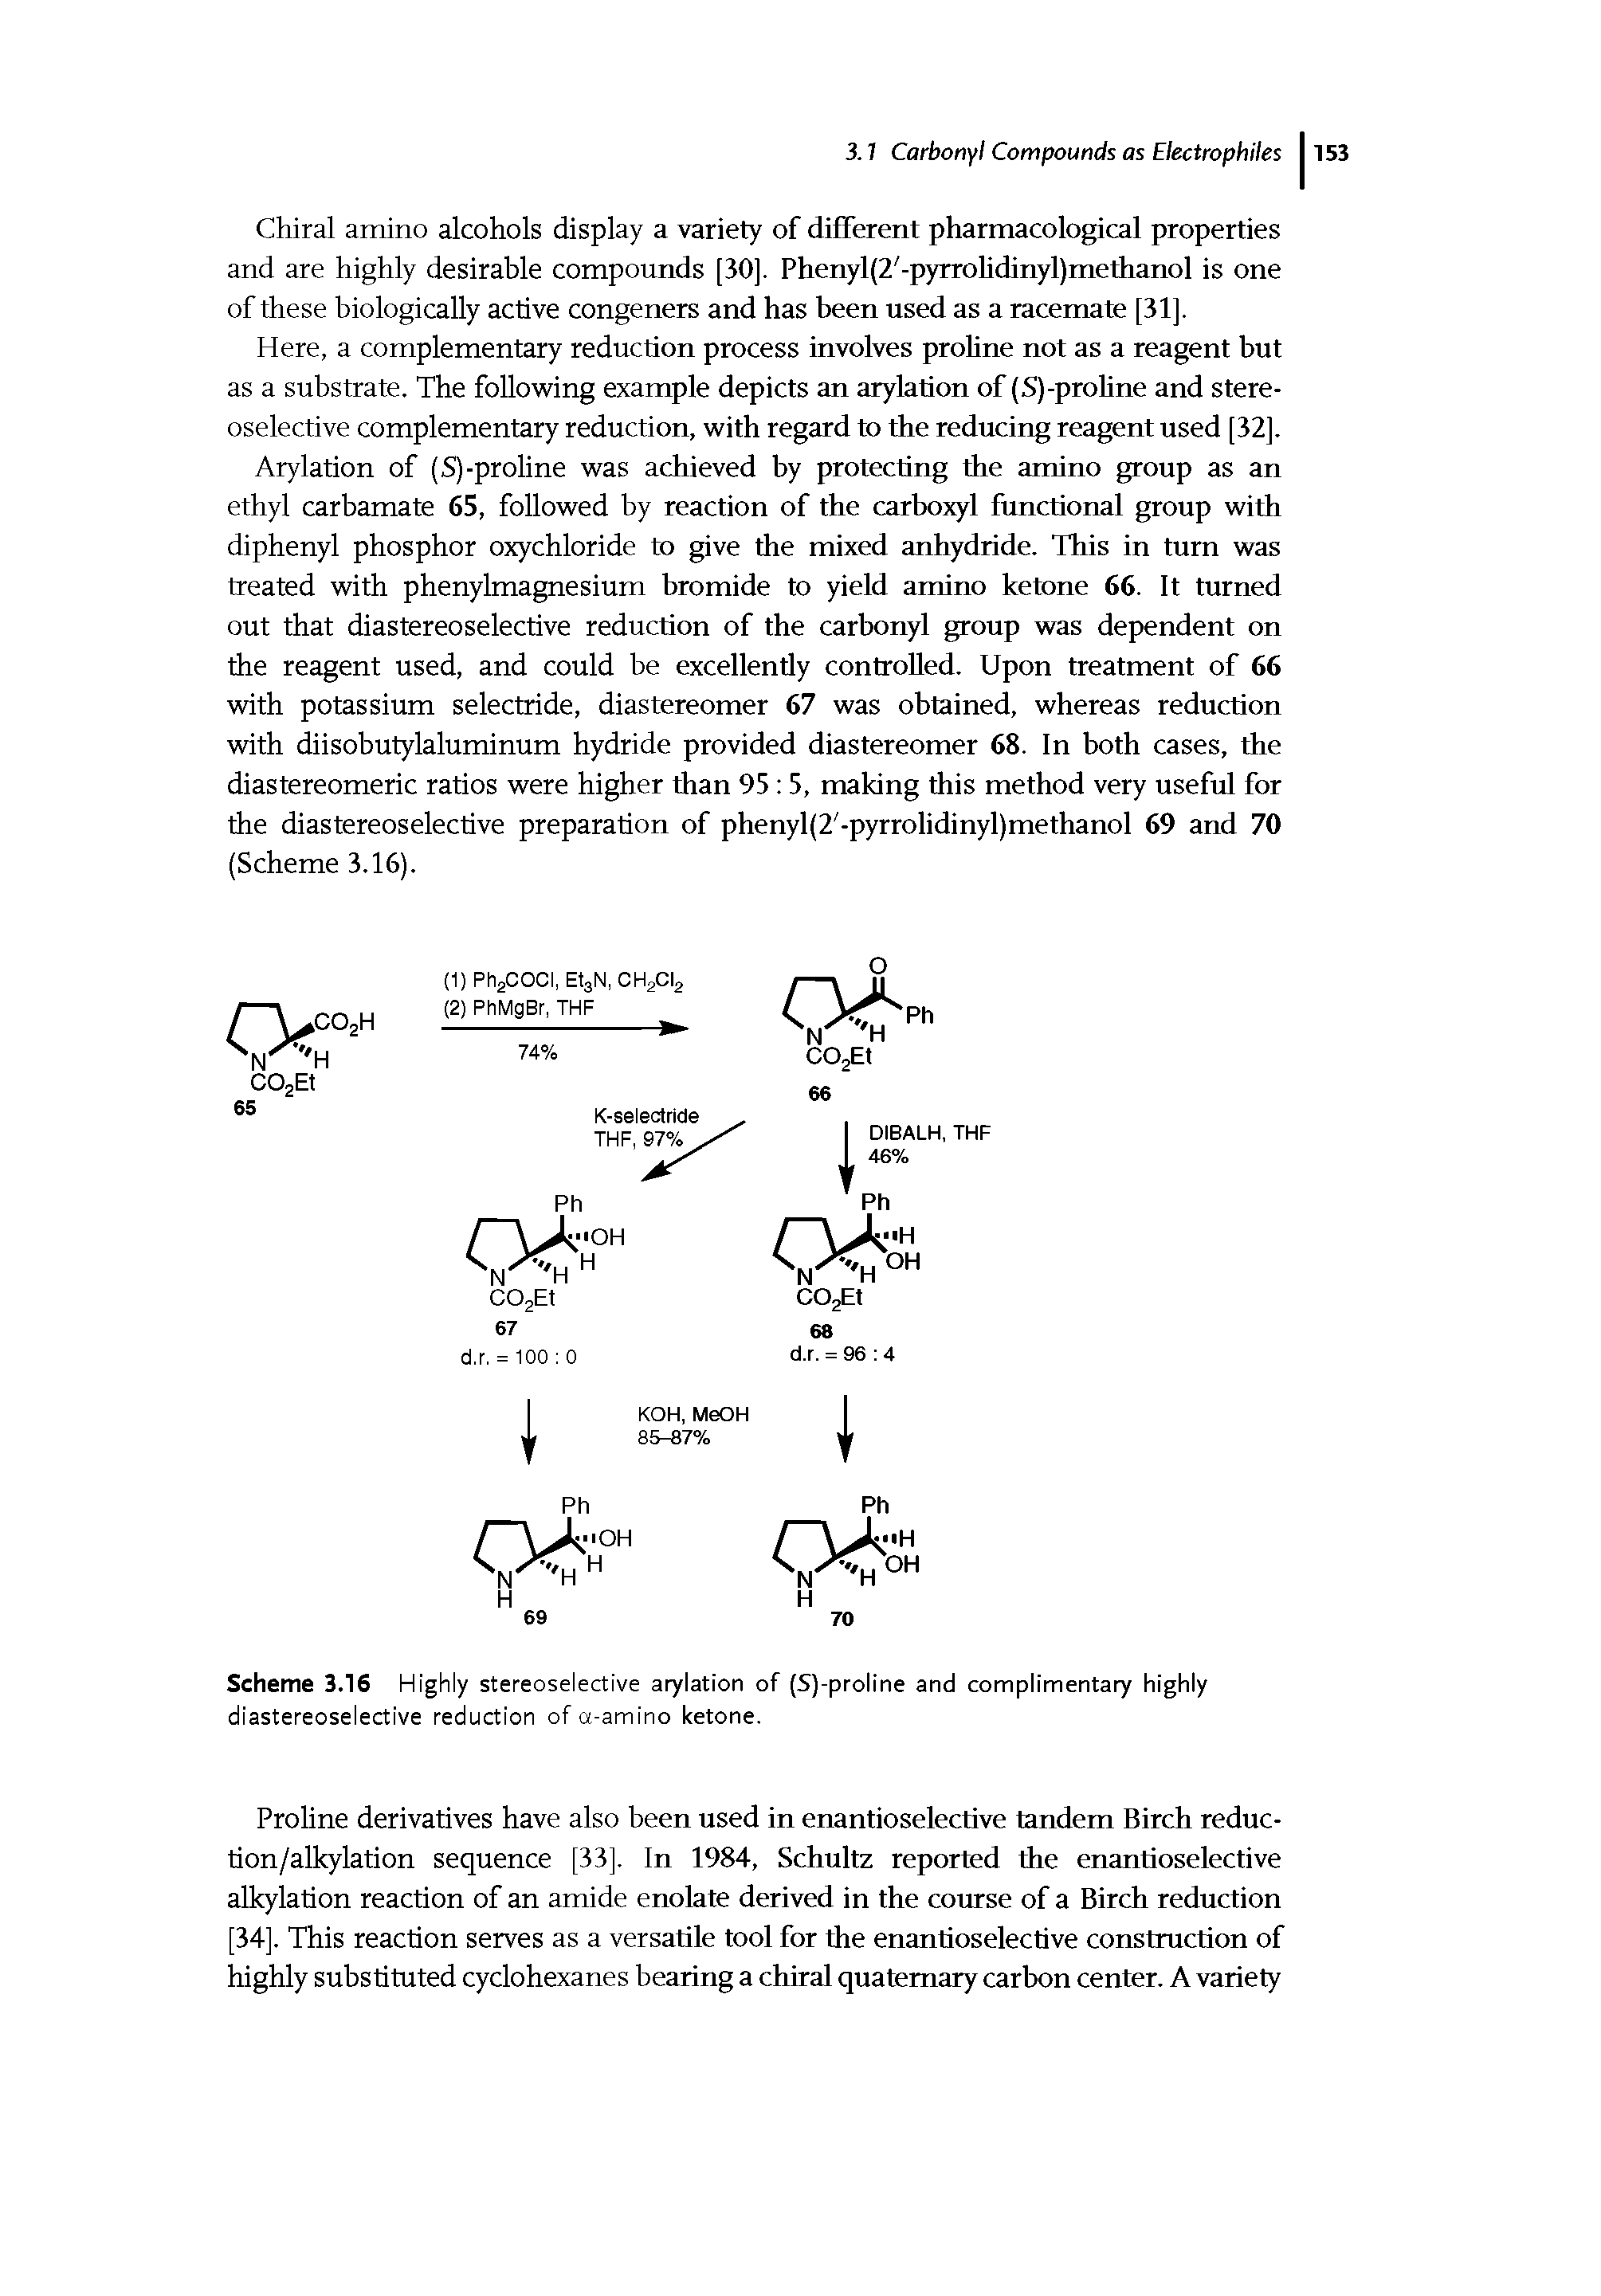 Scheme 3.16 Highly stereoselective arylation of (S)-proline and complimentary highly...